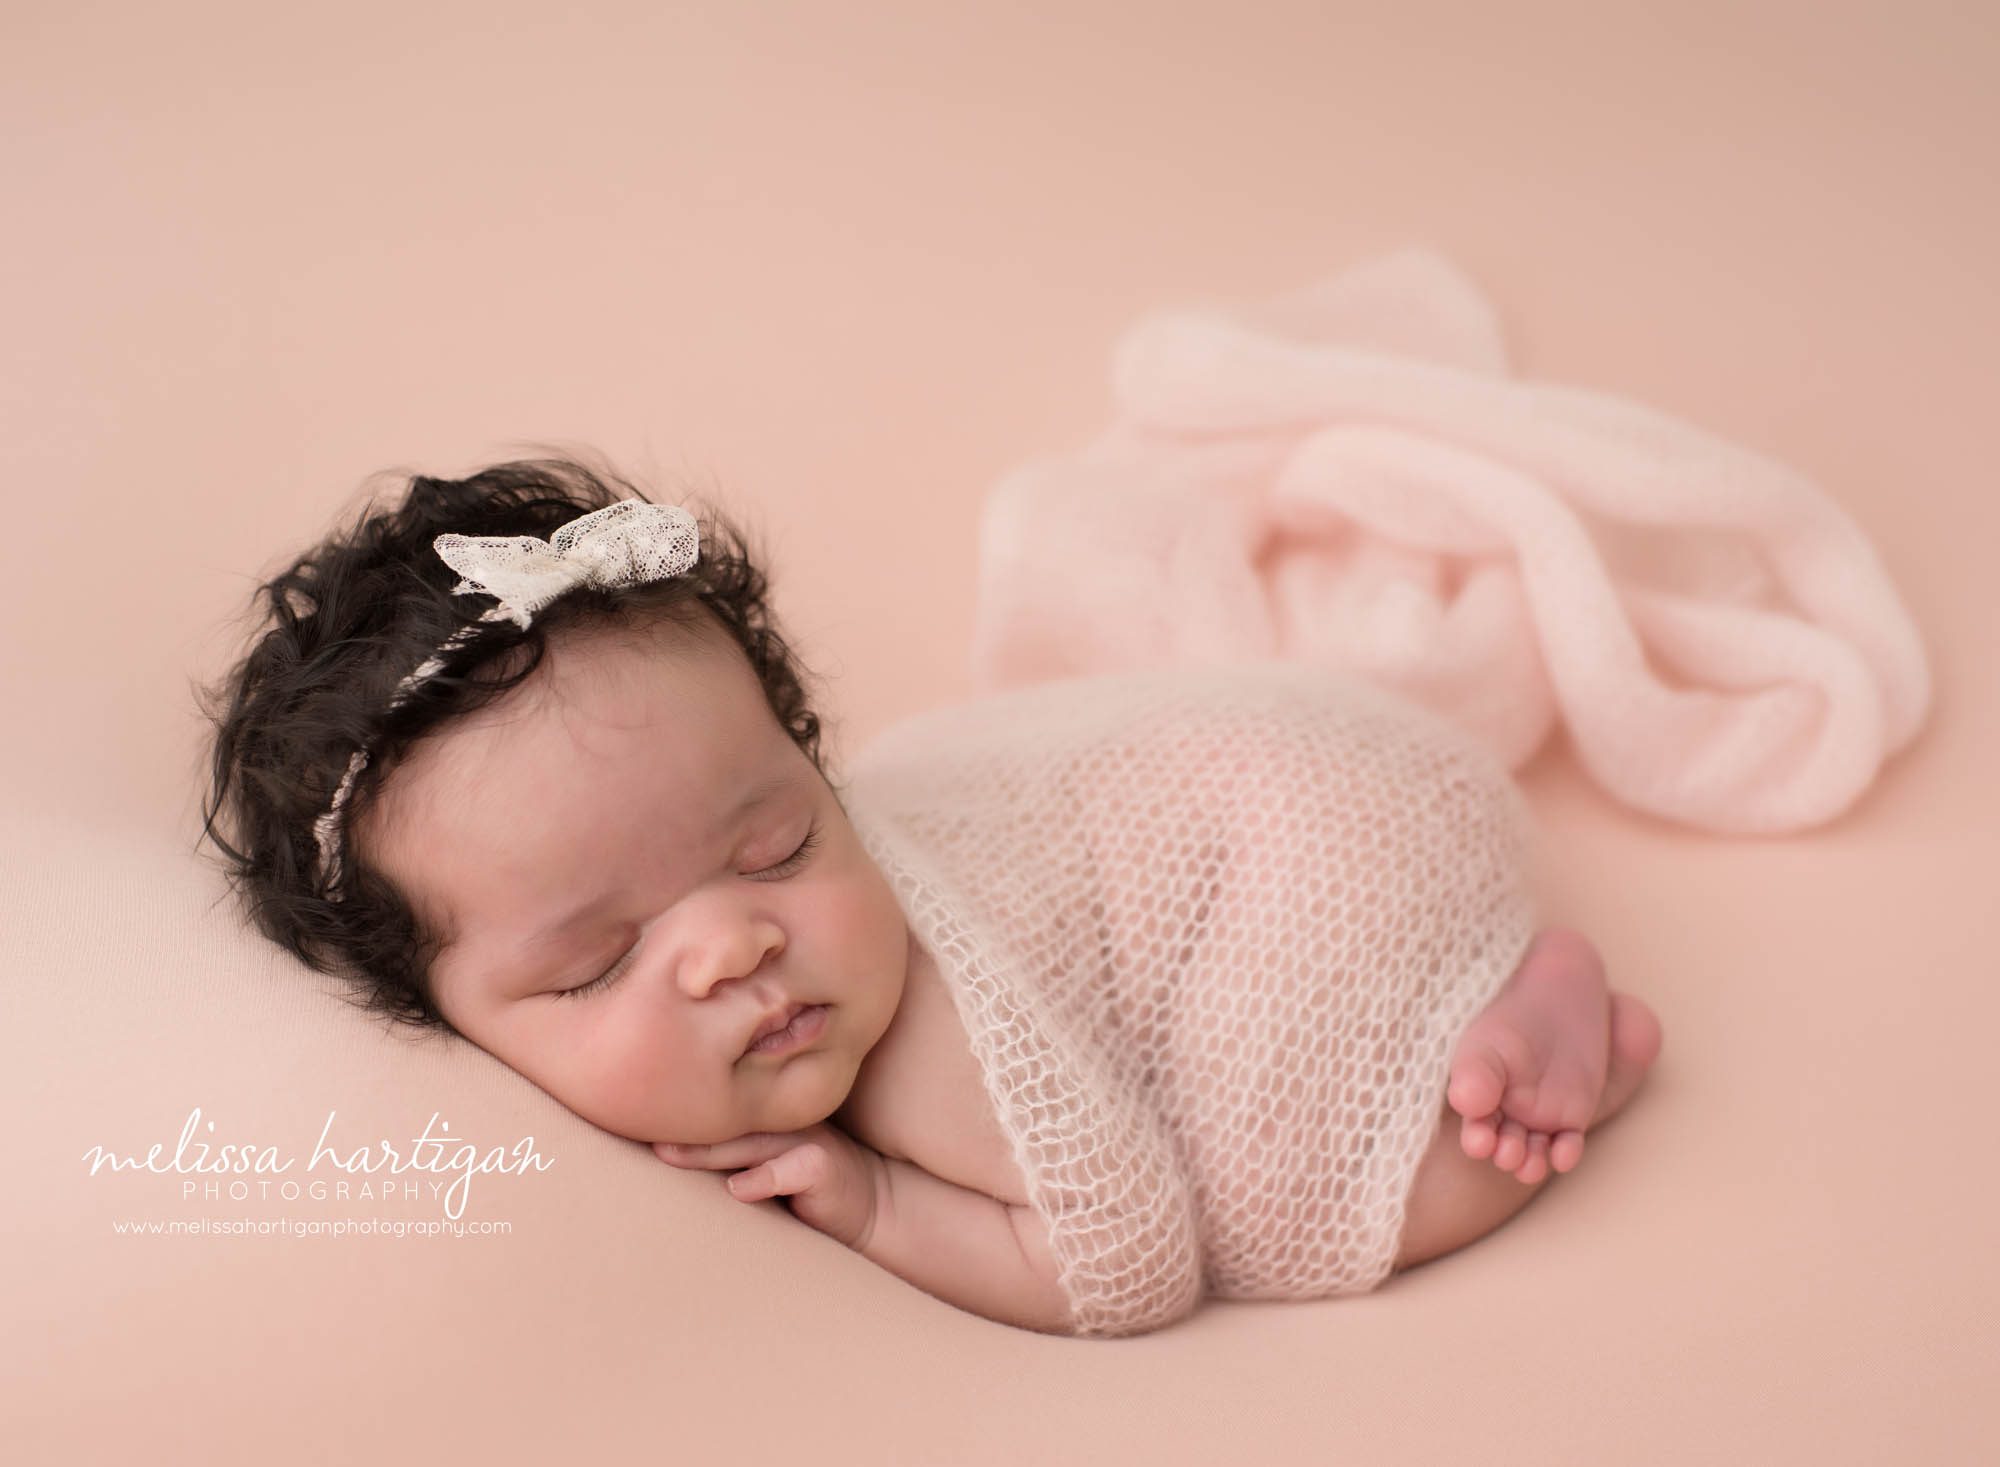 newborn baby girl posed on tummy wearing bow headband and pink knit wrap draped over